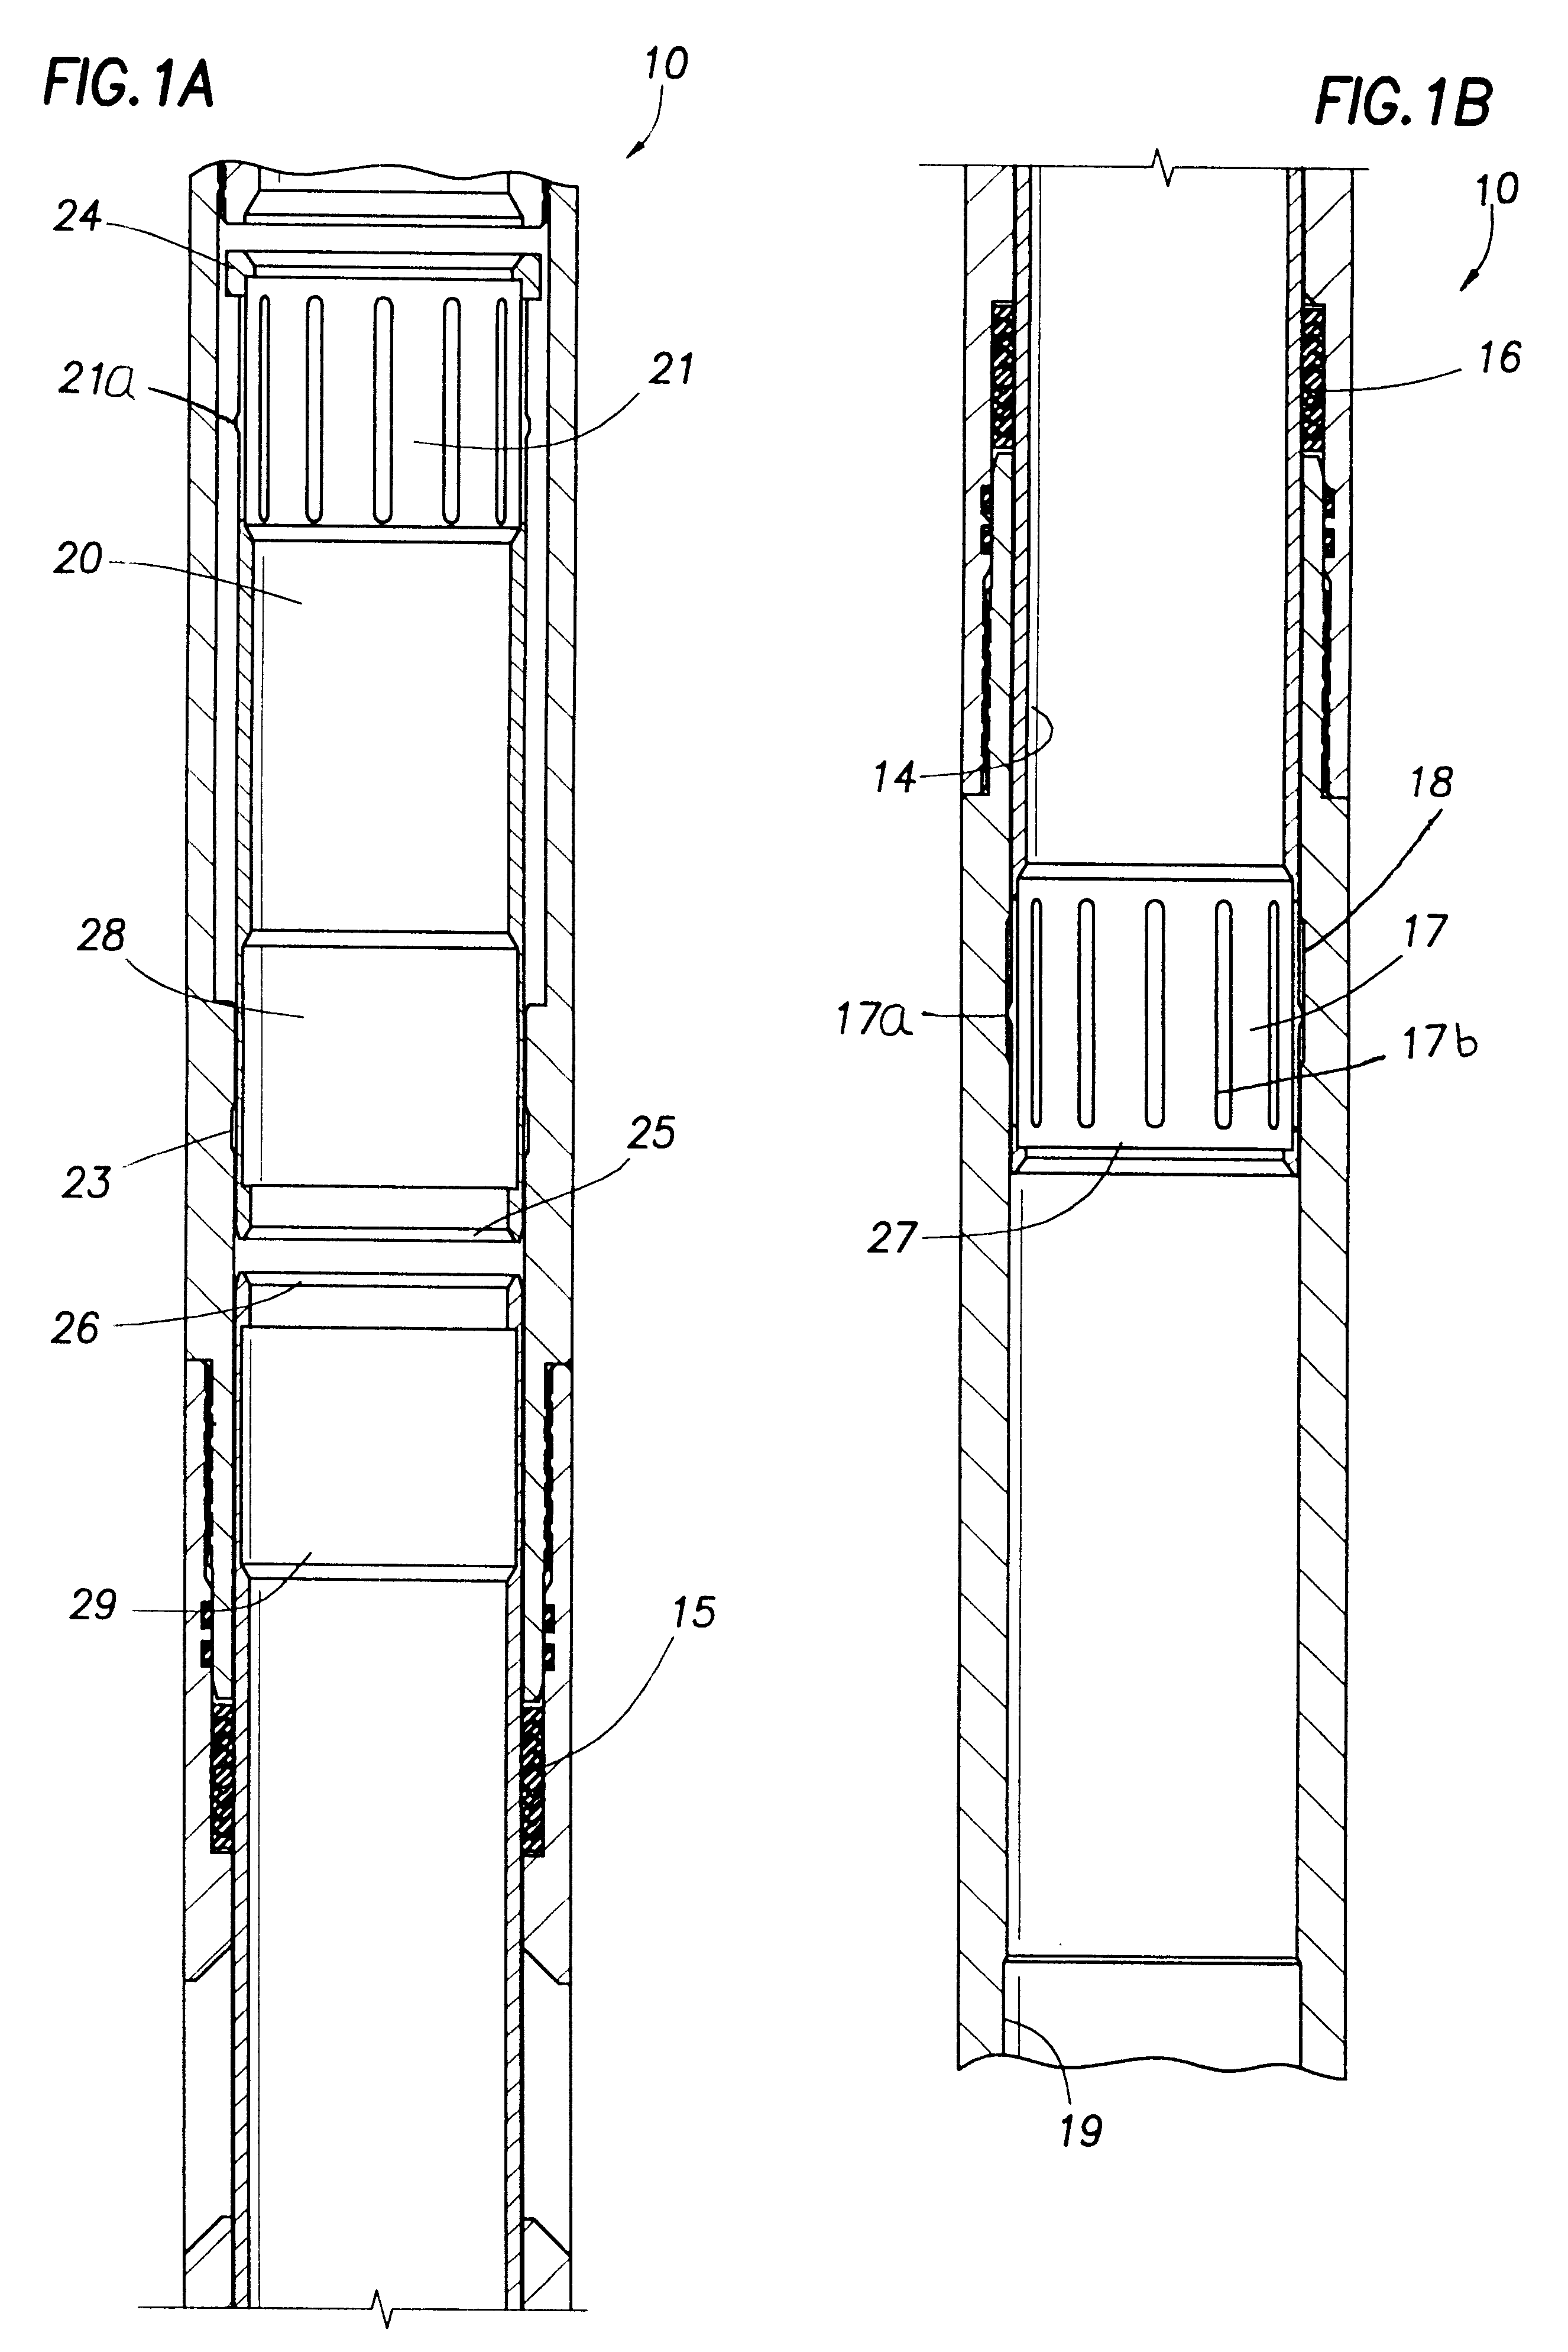 Sliding sleeve assembly for subsurface flow control